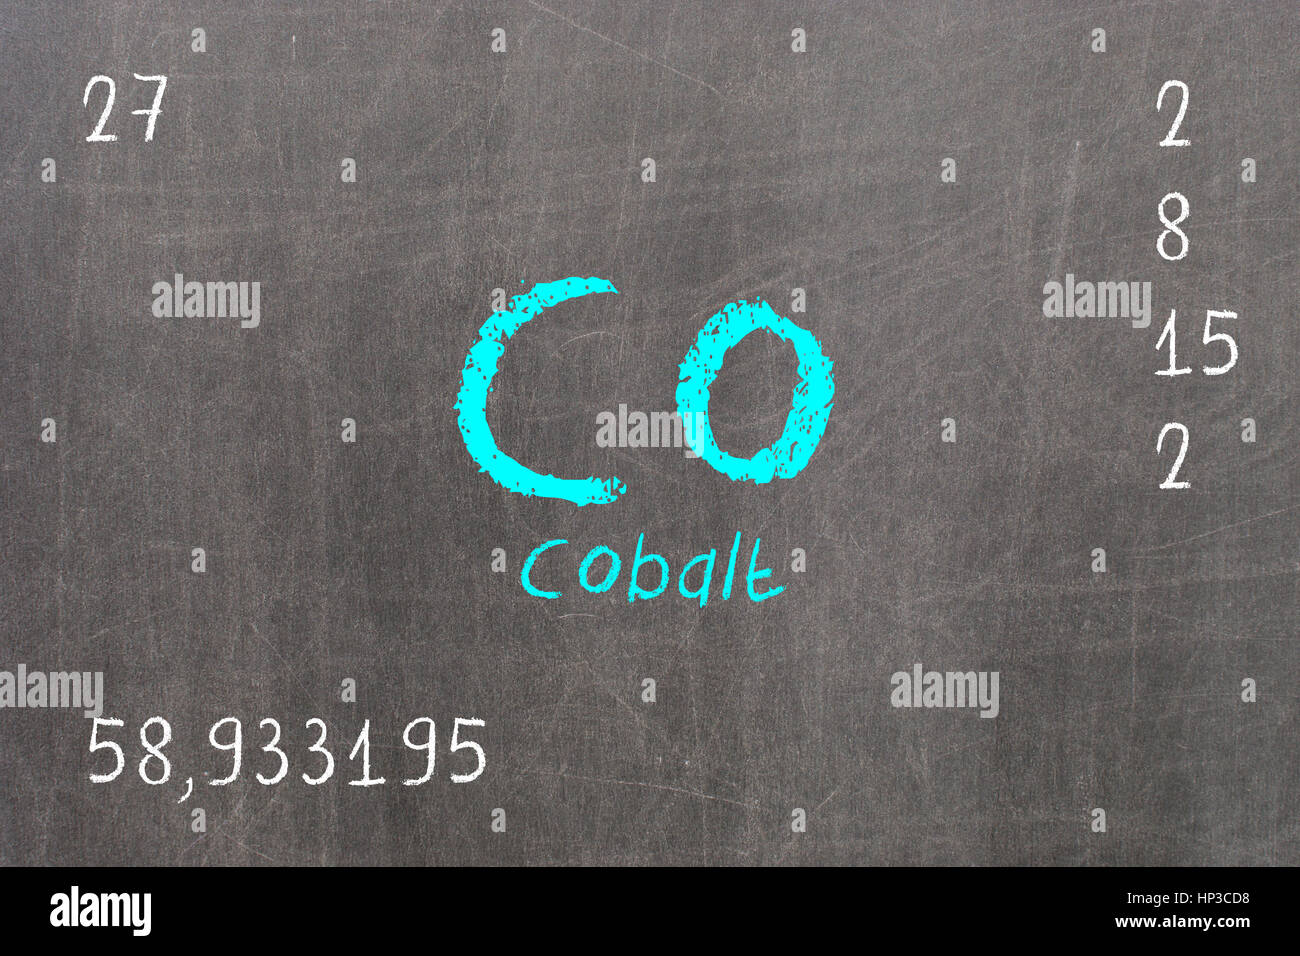 Isolated blackboard with periodic table, Cobalt, chemistry Stock Photo